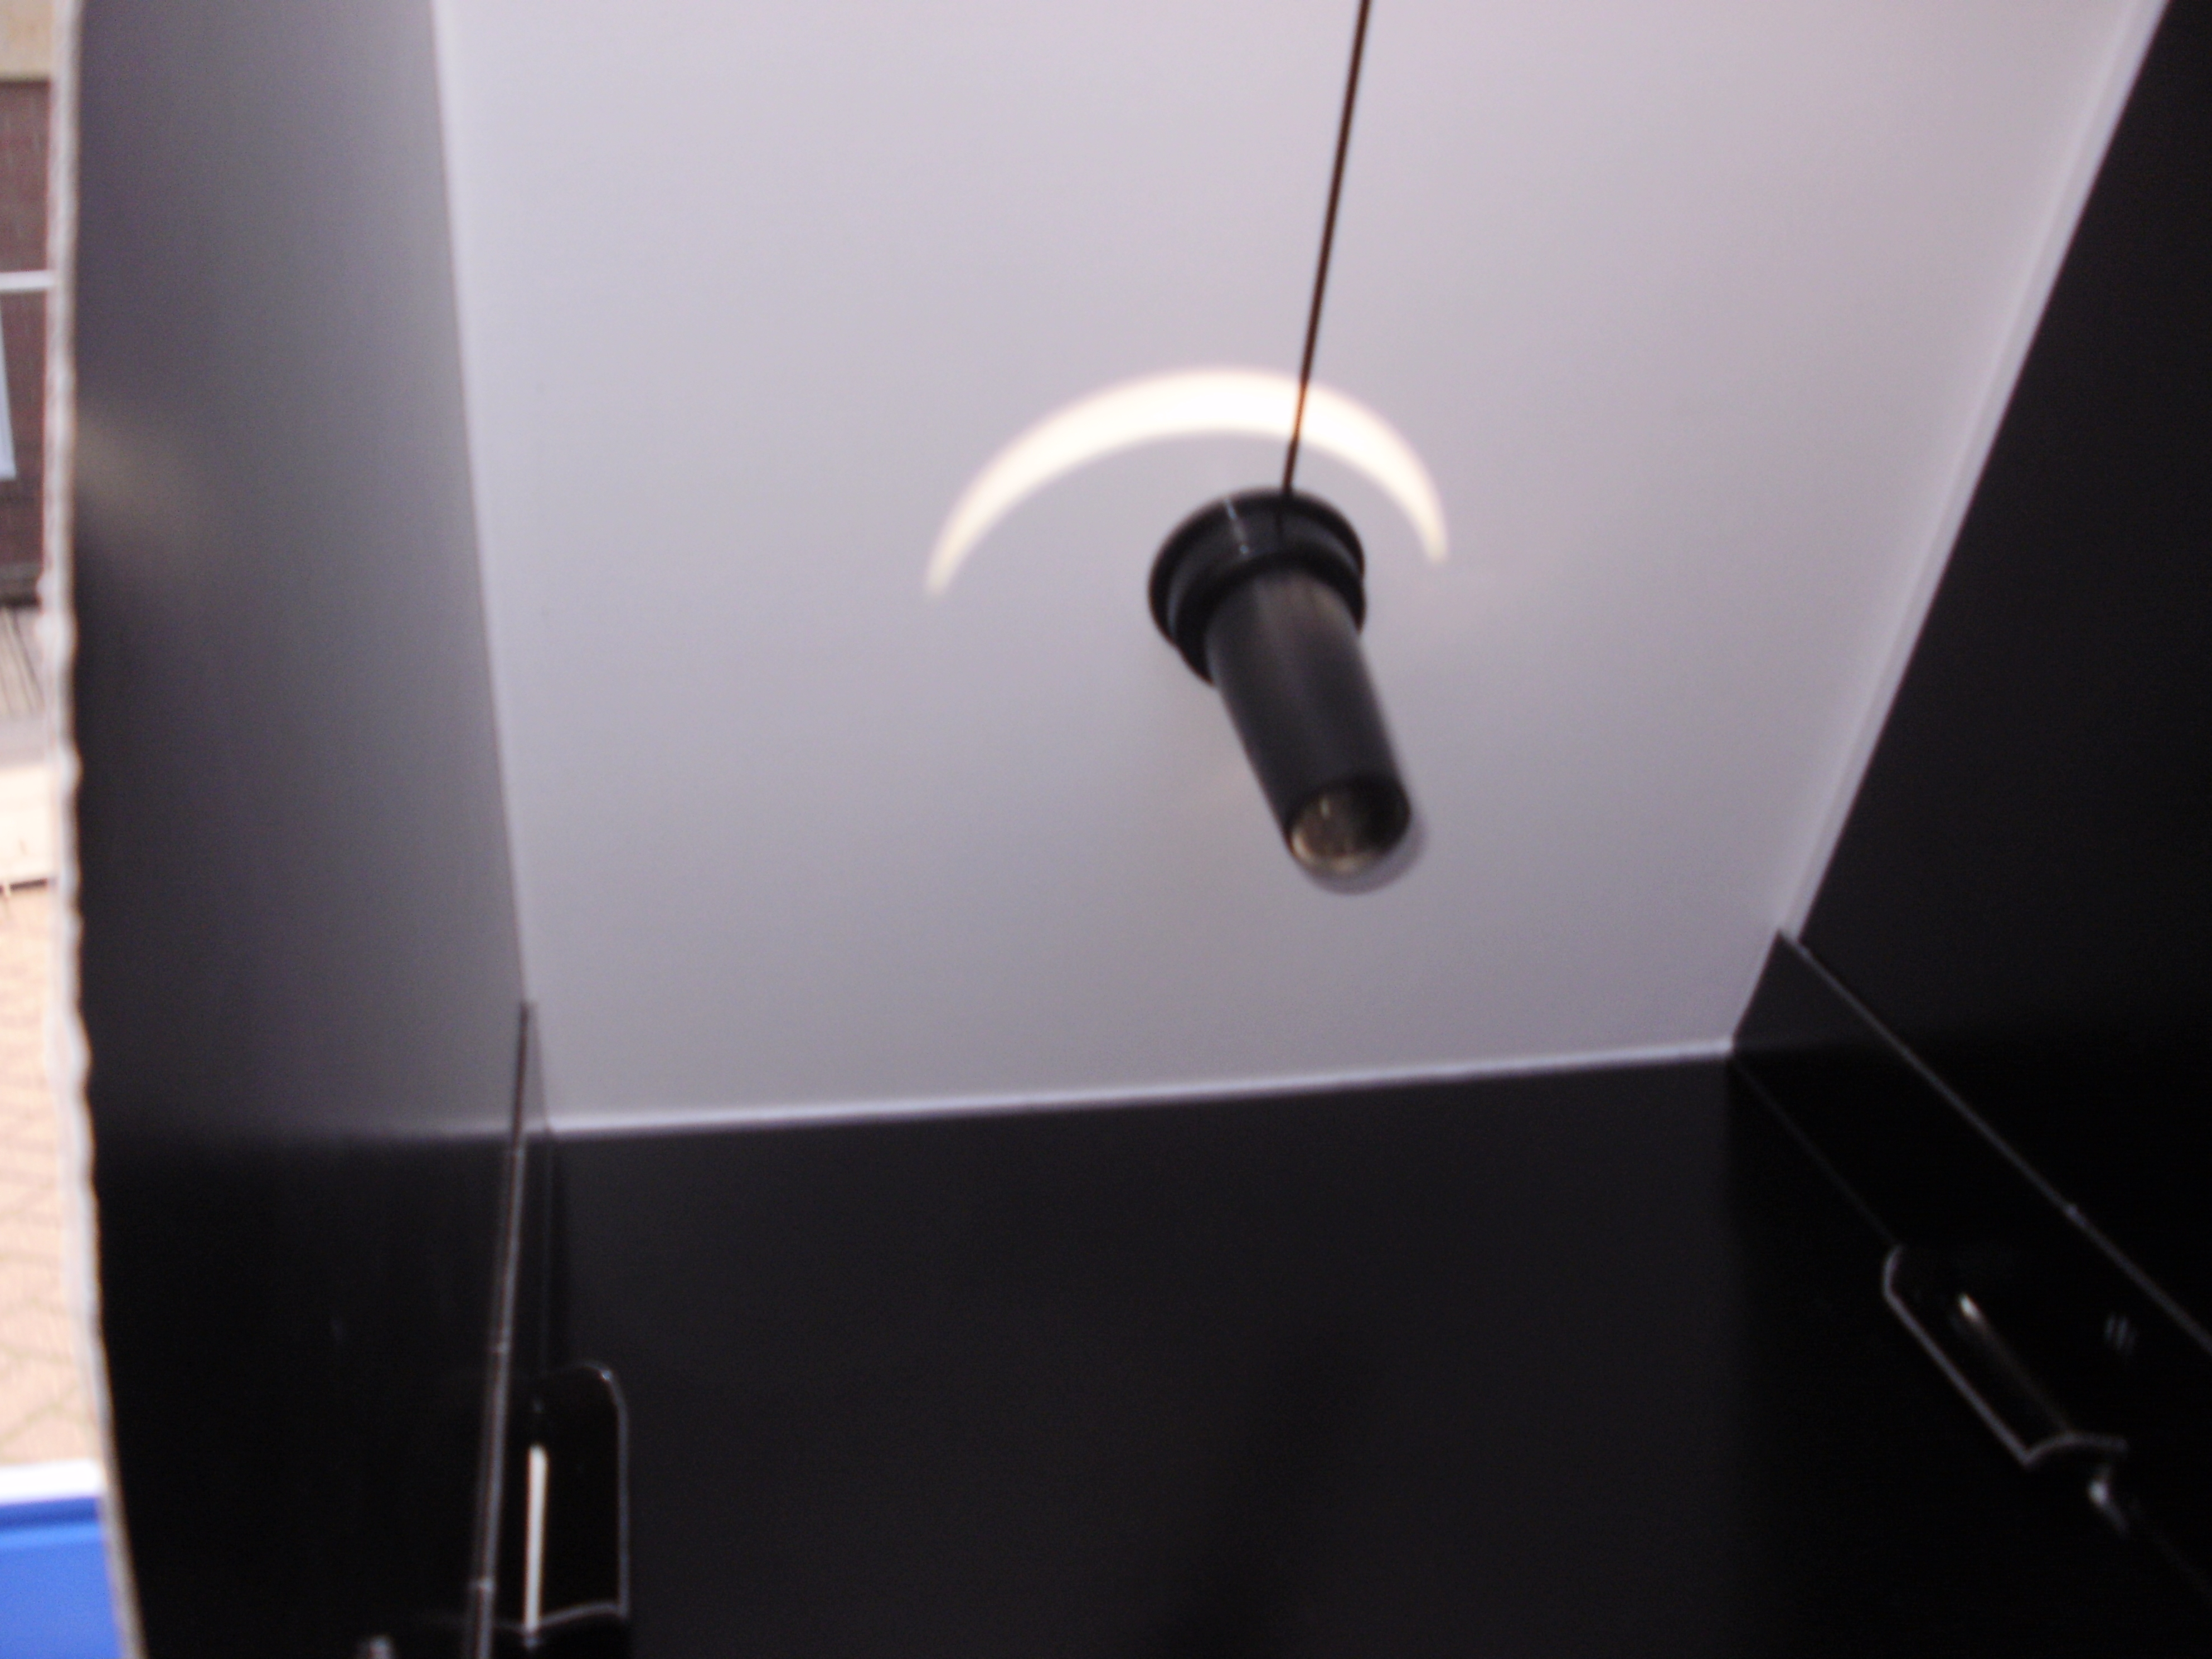 The partial eclipse as seen through the solar scope - taken at 9.31am